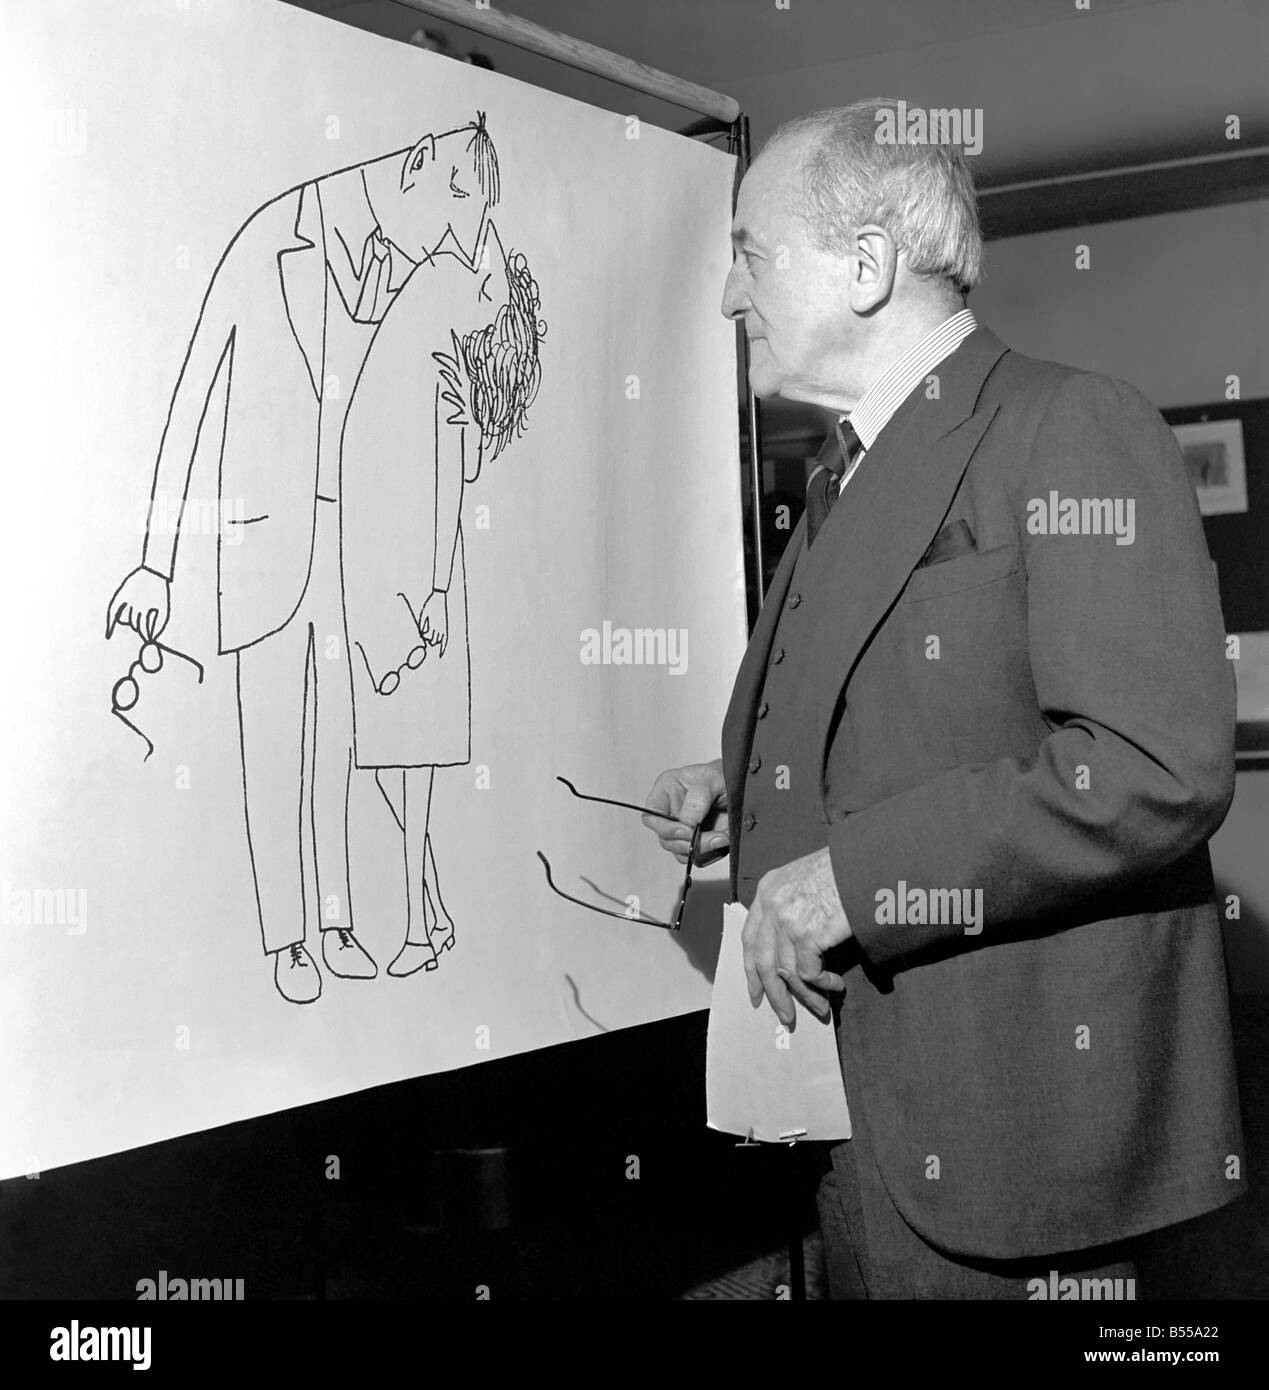 An Exhibition of British and American Humorous Art was opened today by Sir Gerald Kelly at the Tea Centre, Haymarket. The proceeds are in aid of the soldier, Sailor and Airman's Families Association and there are numourous drawings by over 100 British and American artists. November 1953 D7142 Stock Photo